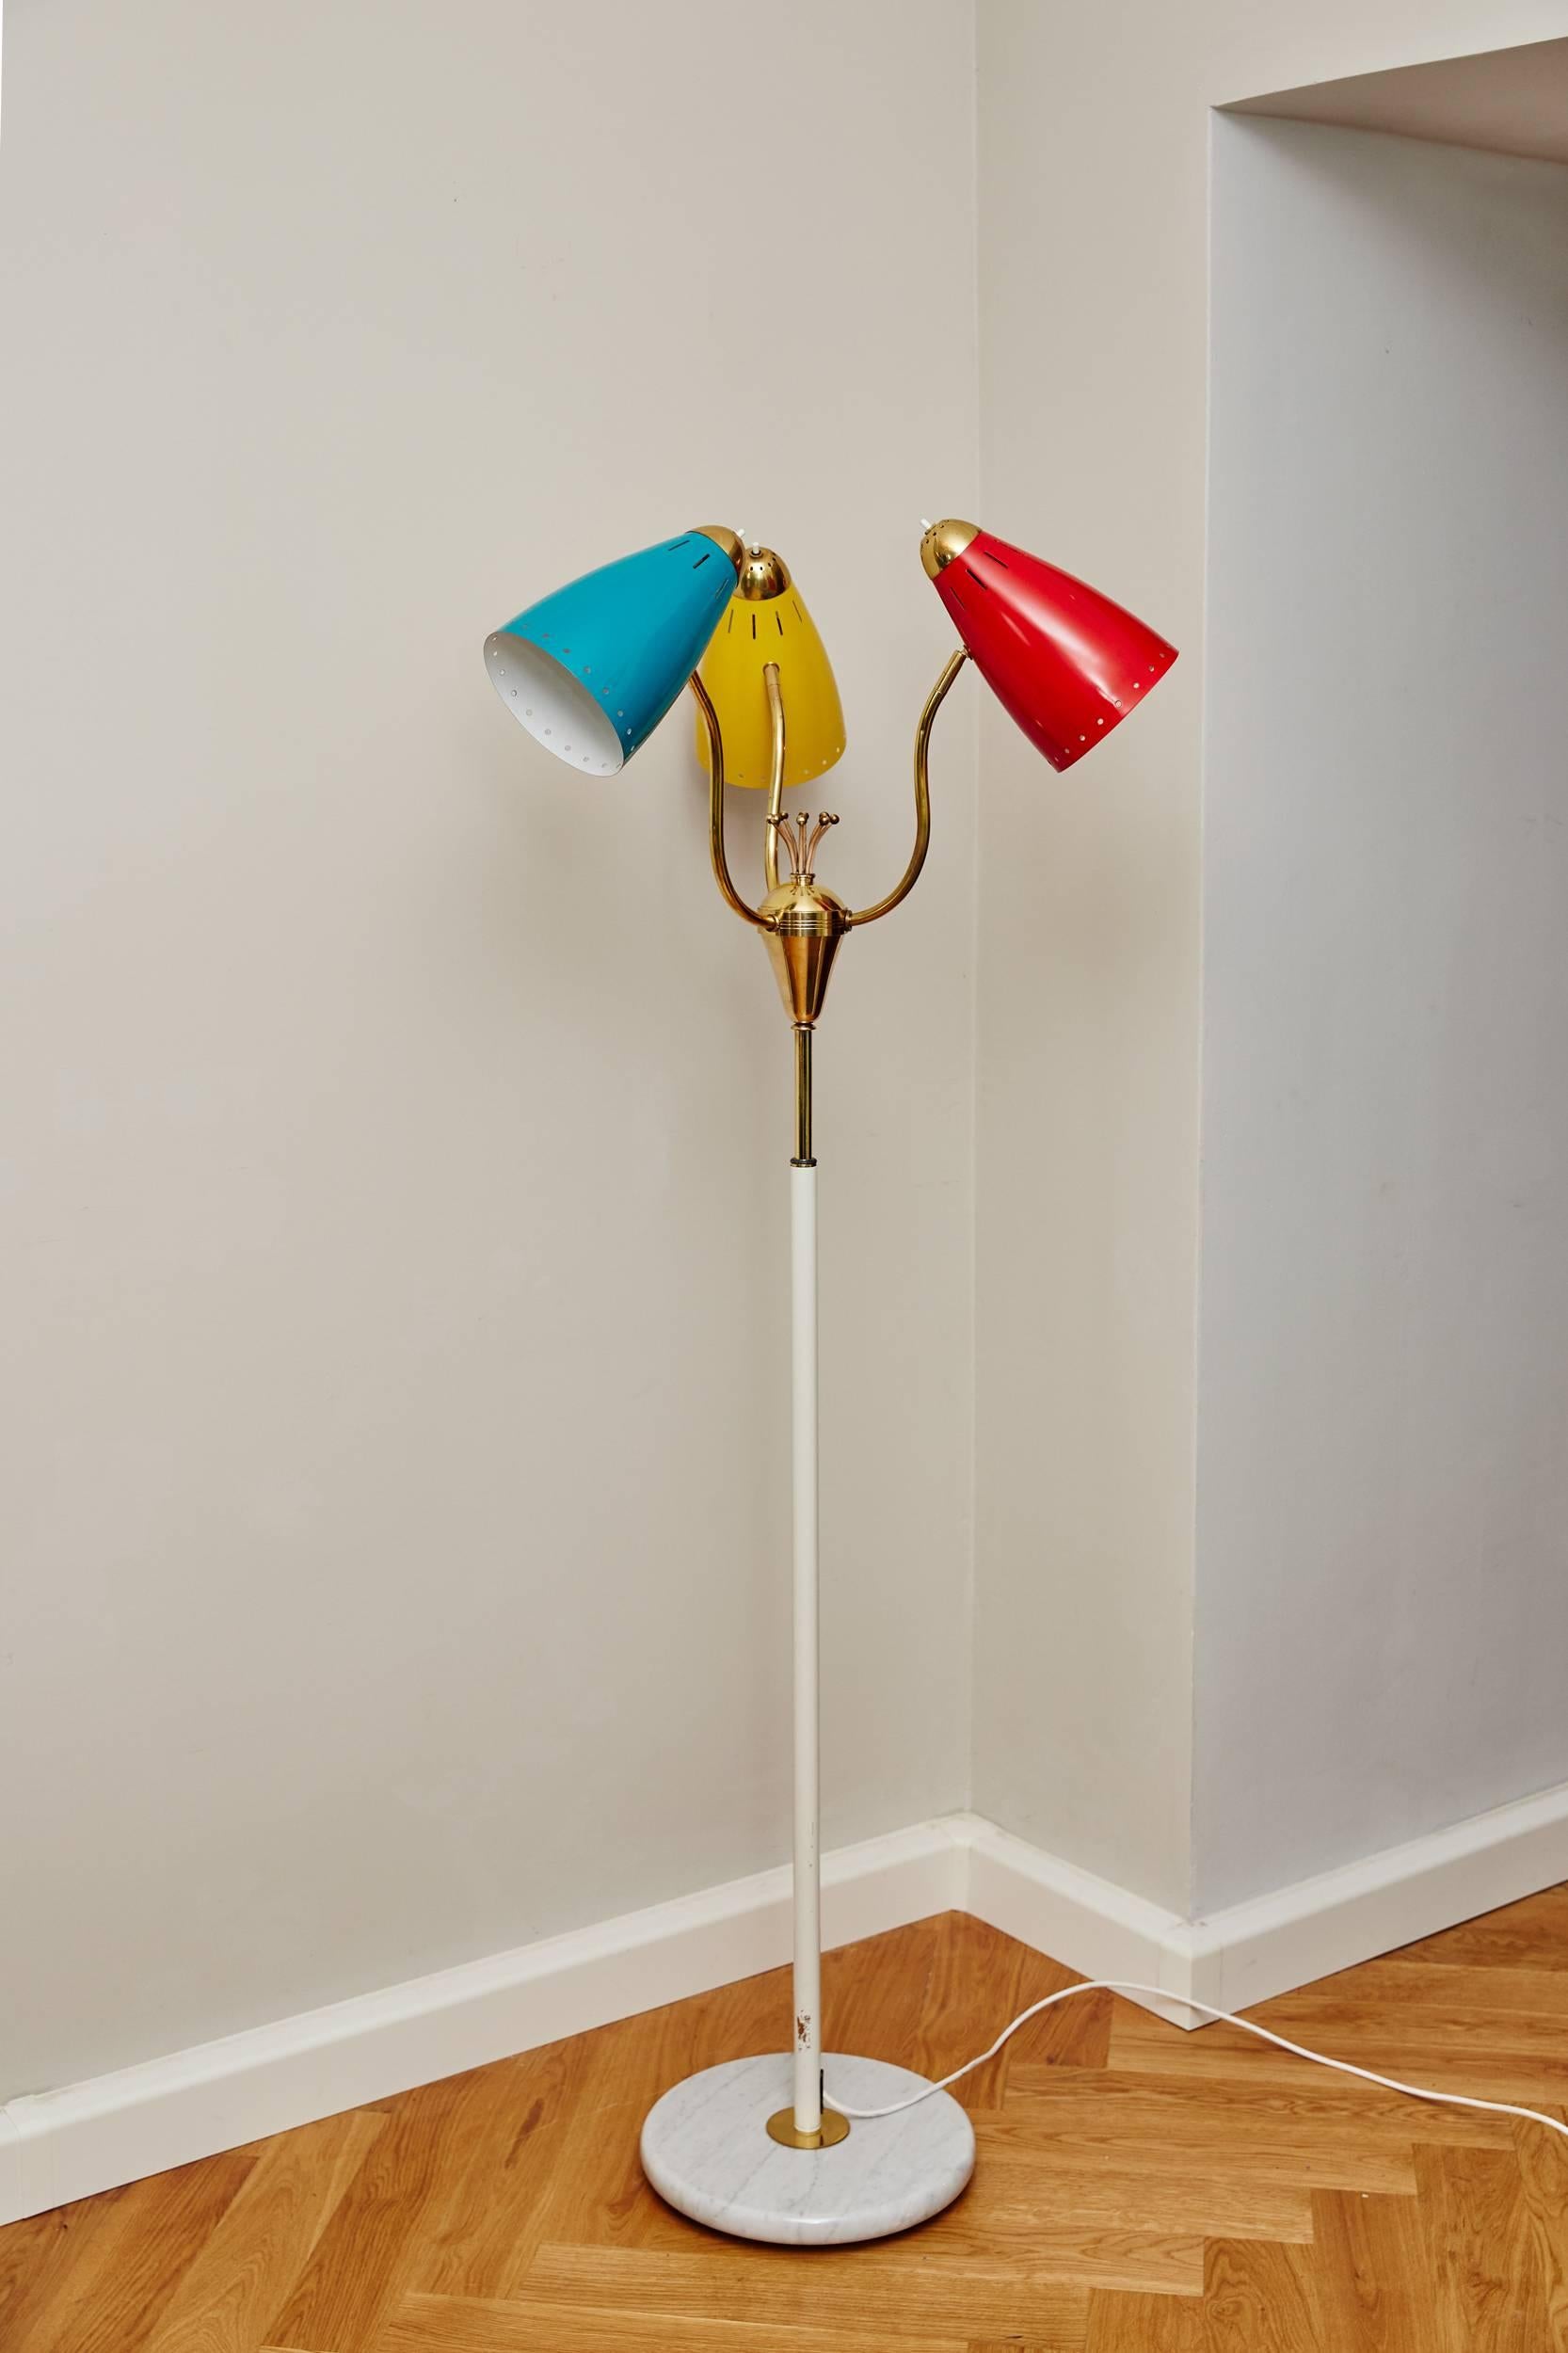 Elegant Floor Lamp attributed Arredoluce, Italy circa 1970, three-armed, adjustable lacquered metal shades in three colors, brass arms, brass applications, lacquered rod, adjustable brass rod from 145 cm to 220 cm, marble base, diameter 75 cm, lamp